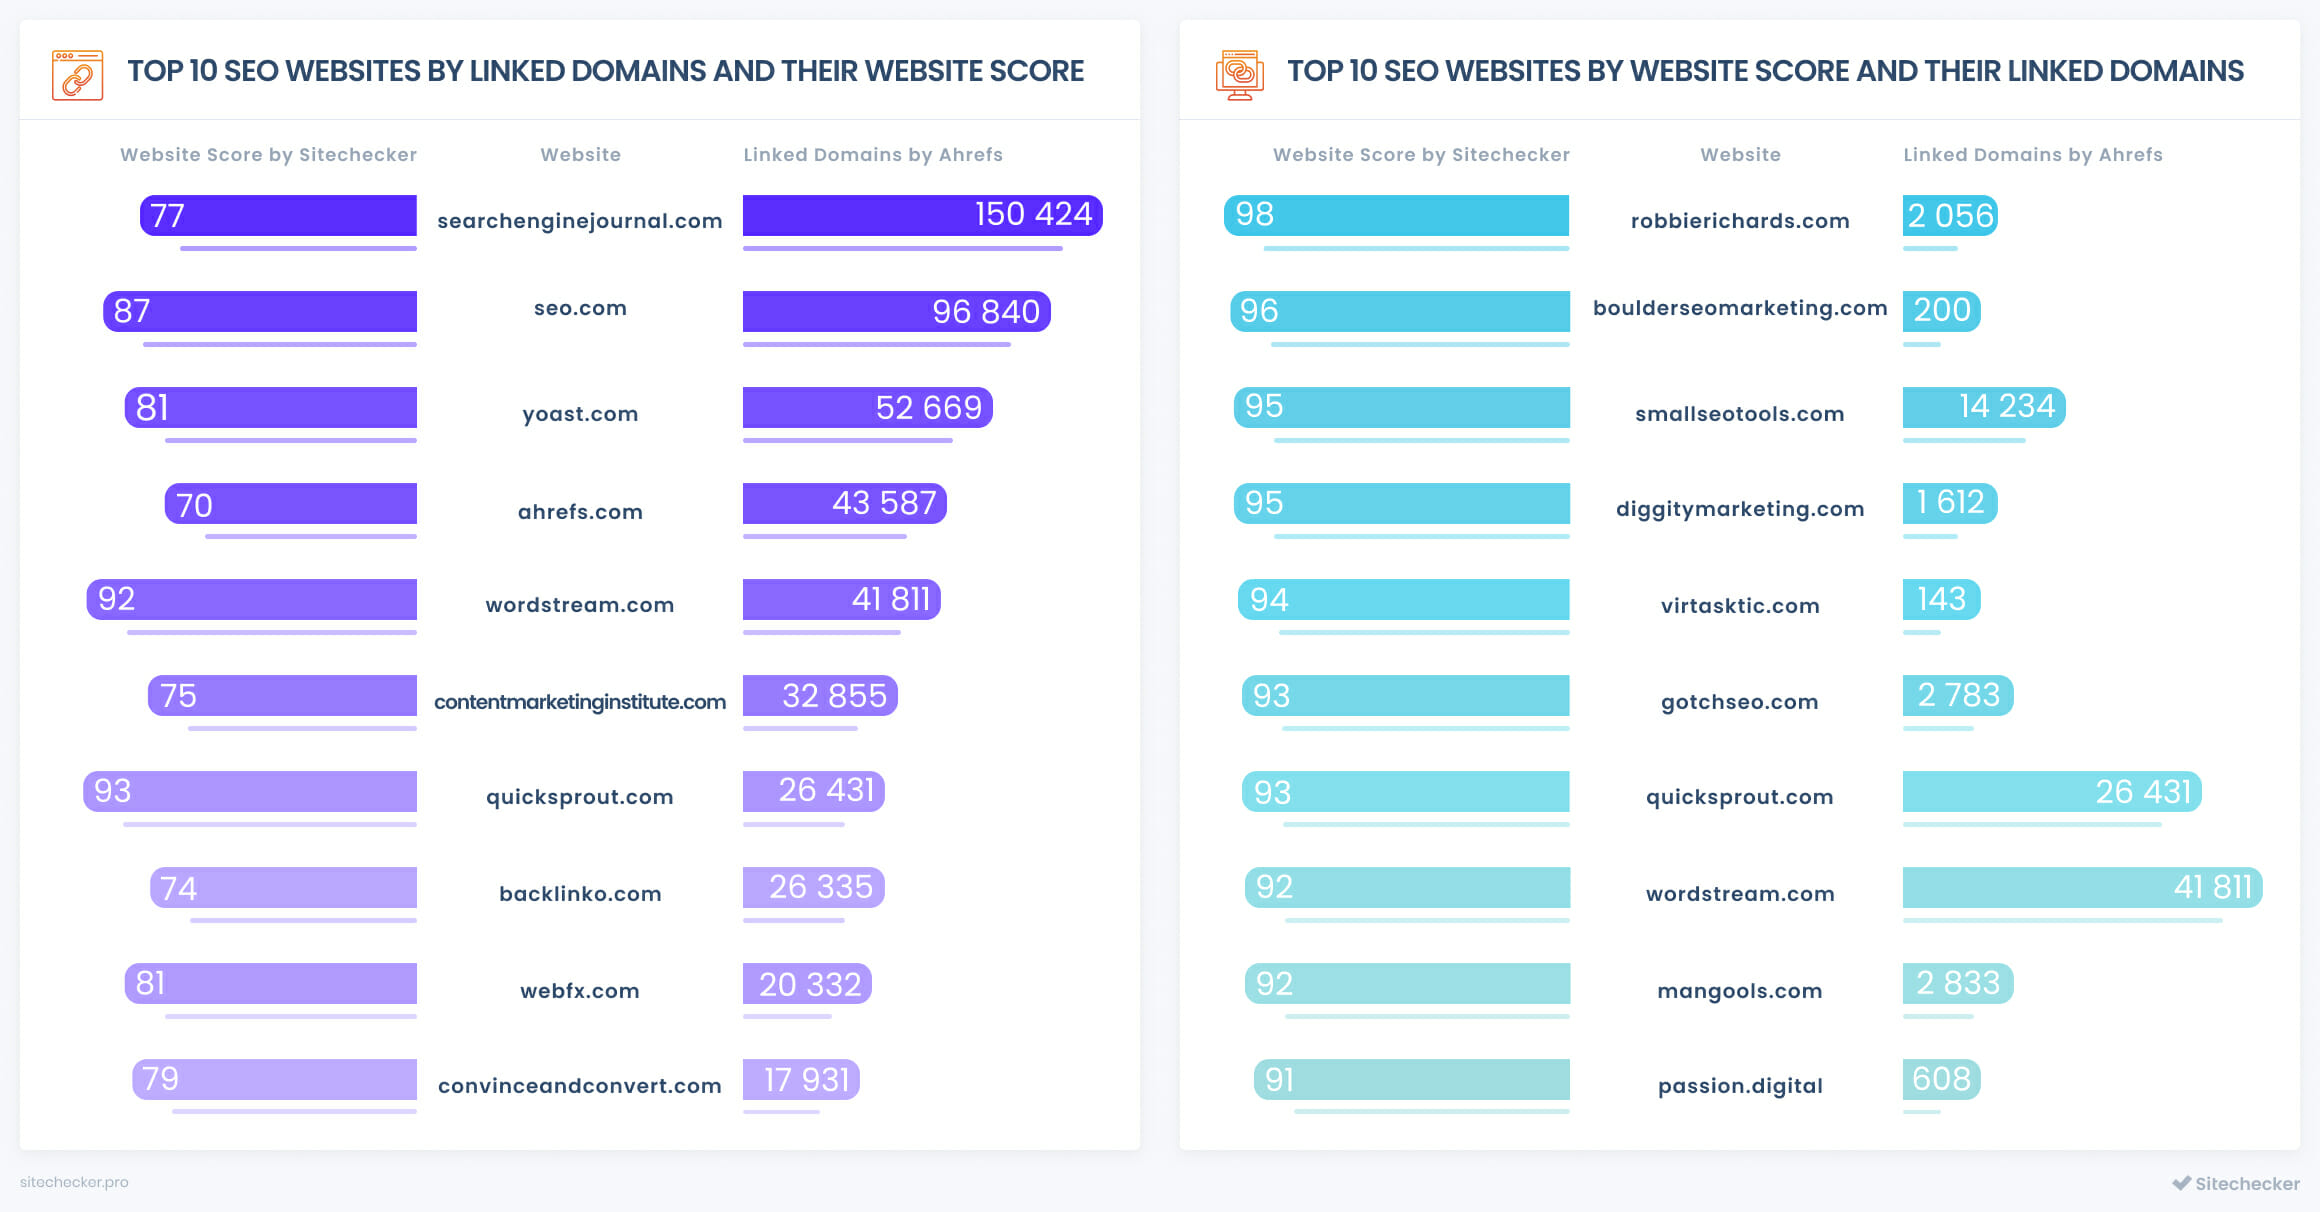 top seo companies by linked domains and website score